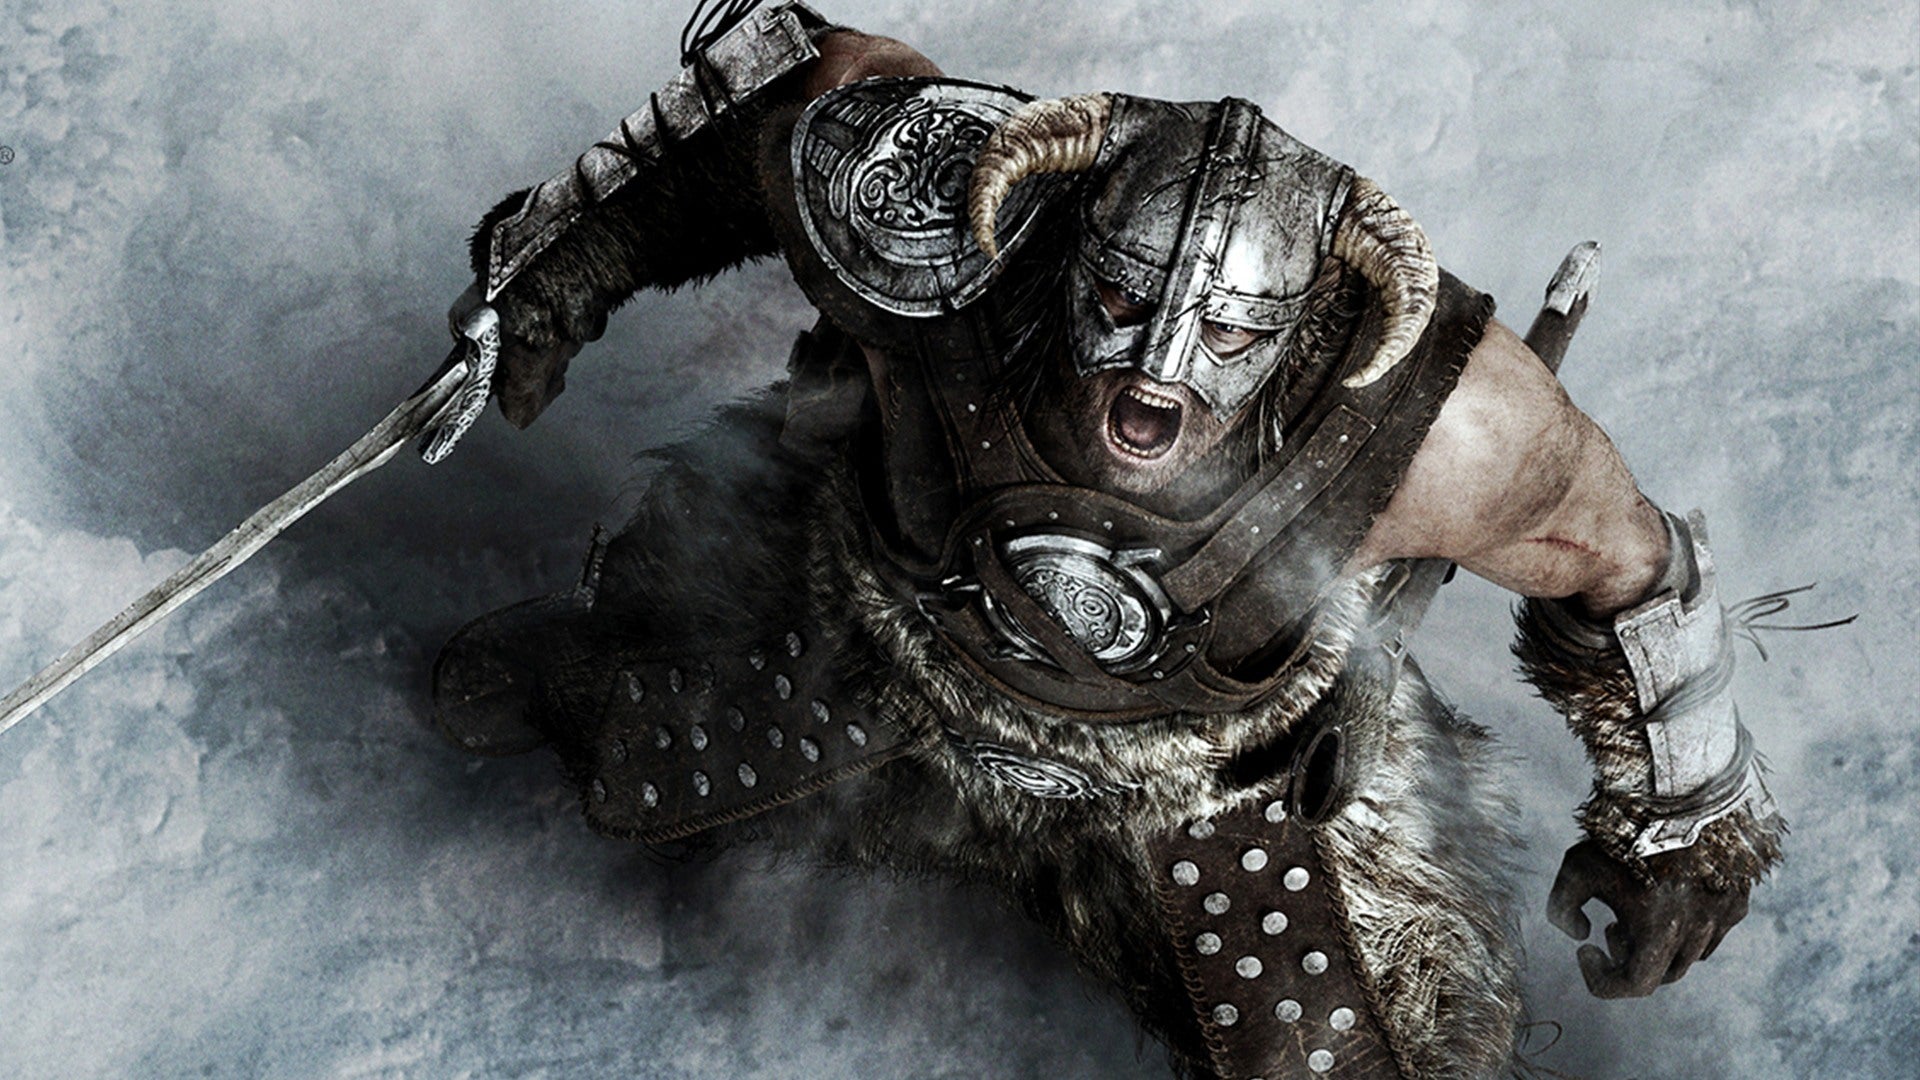 A sense of freedom is essential to us' – designing the Skyrim board game